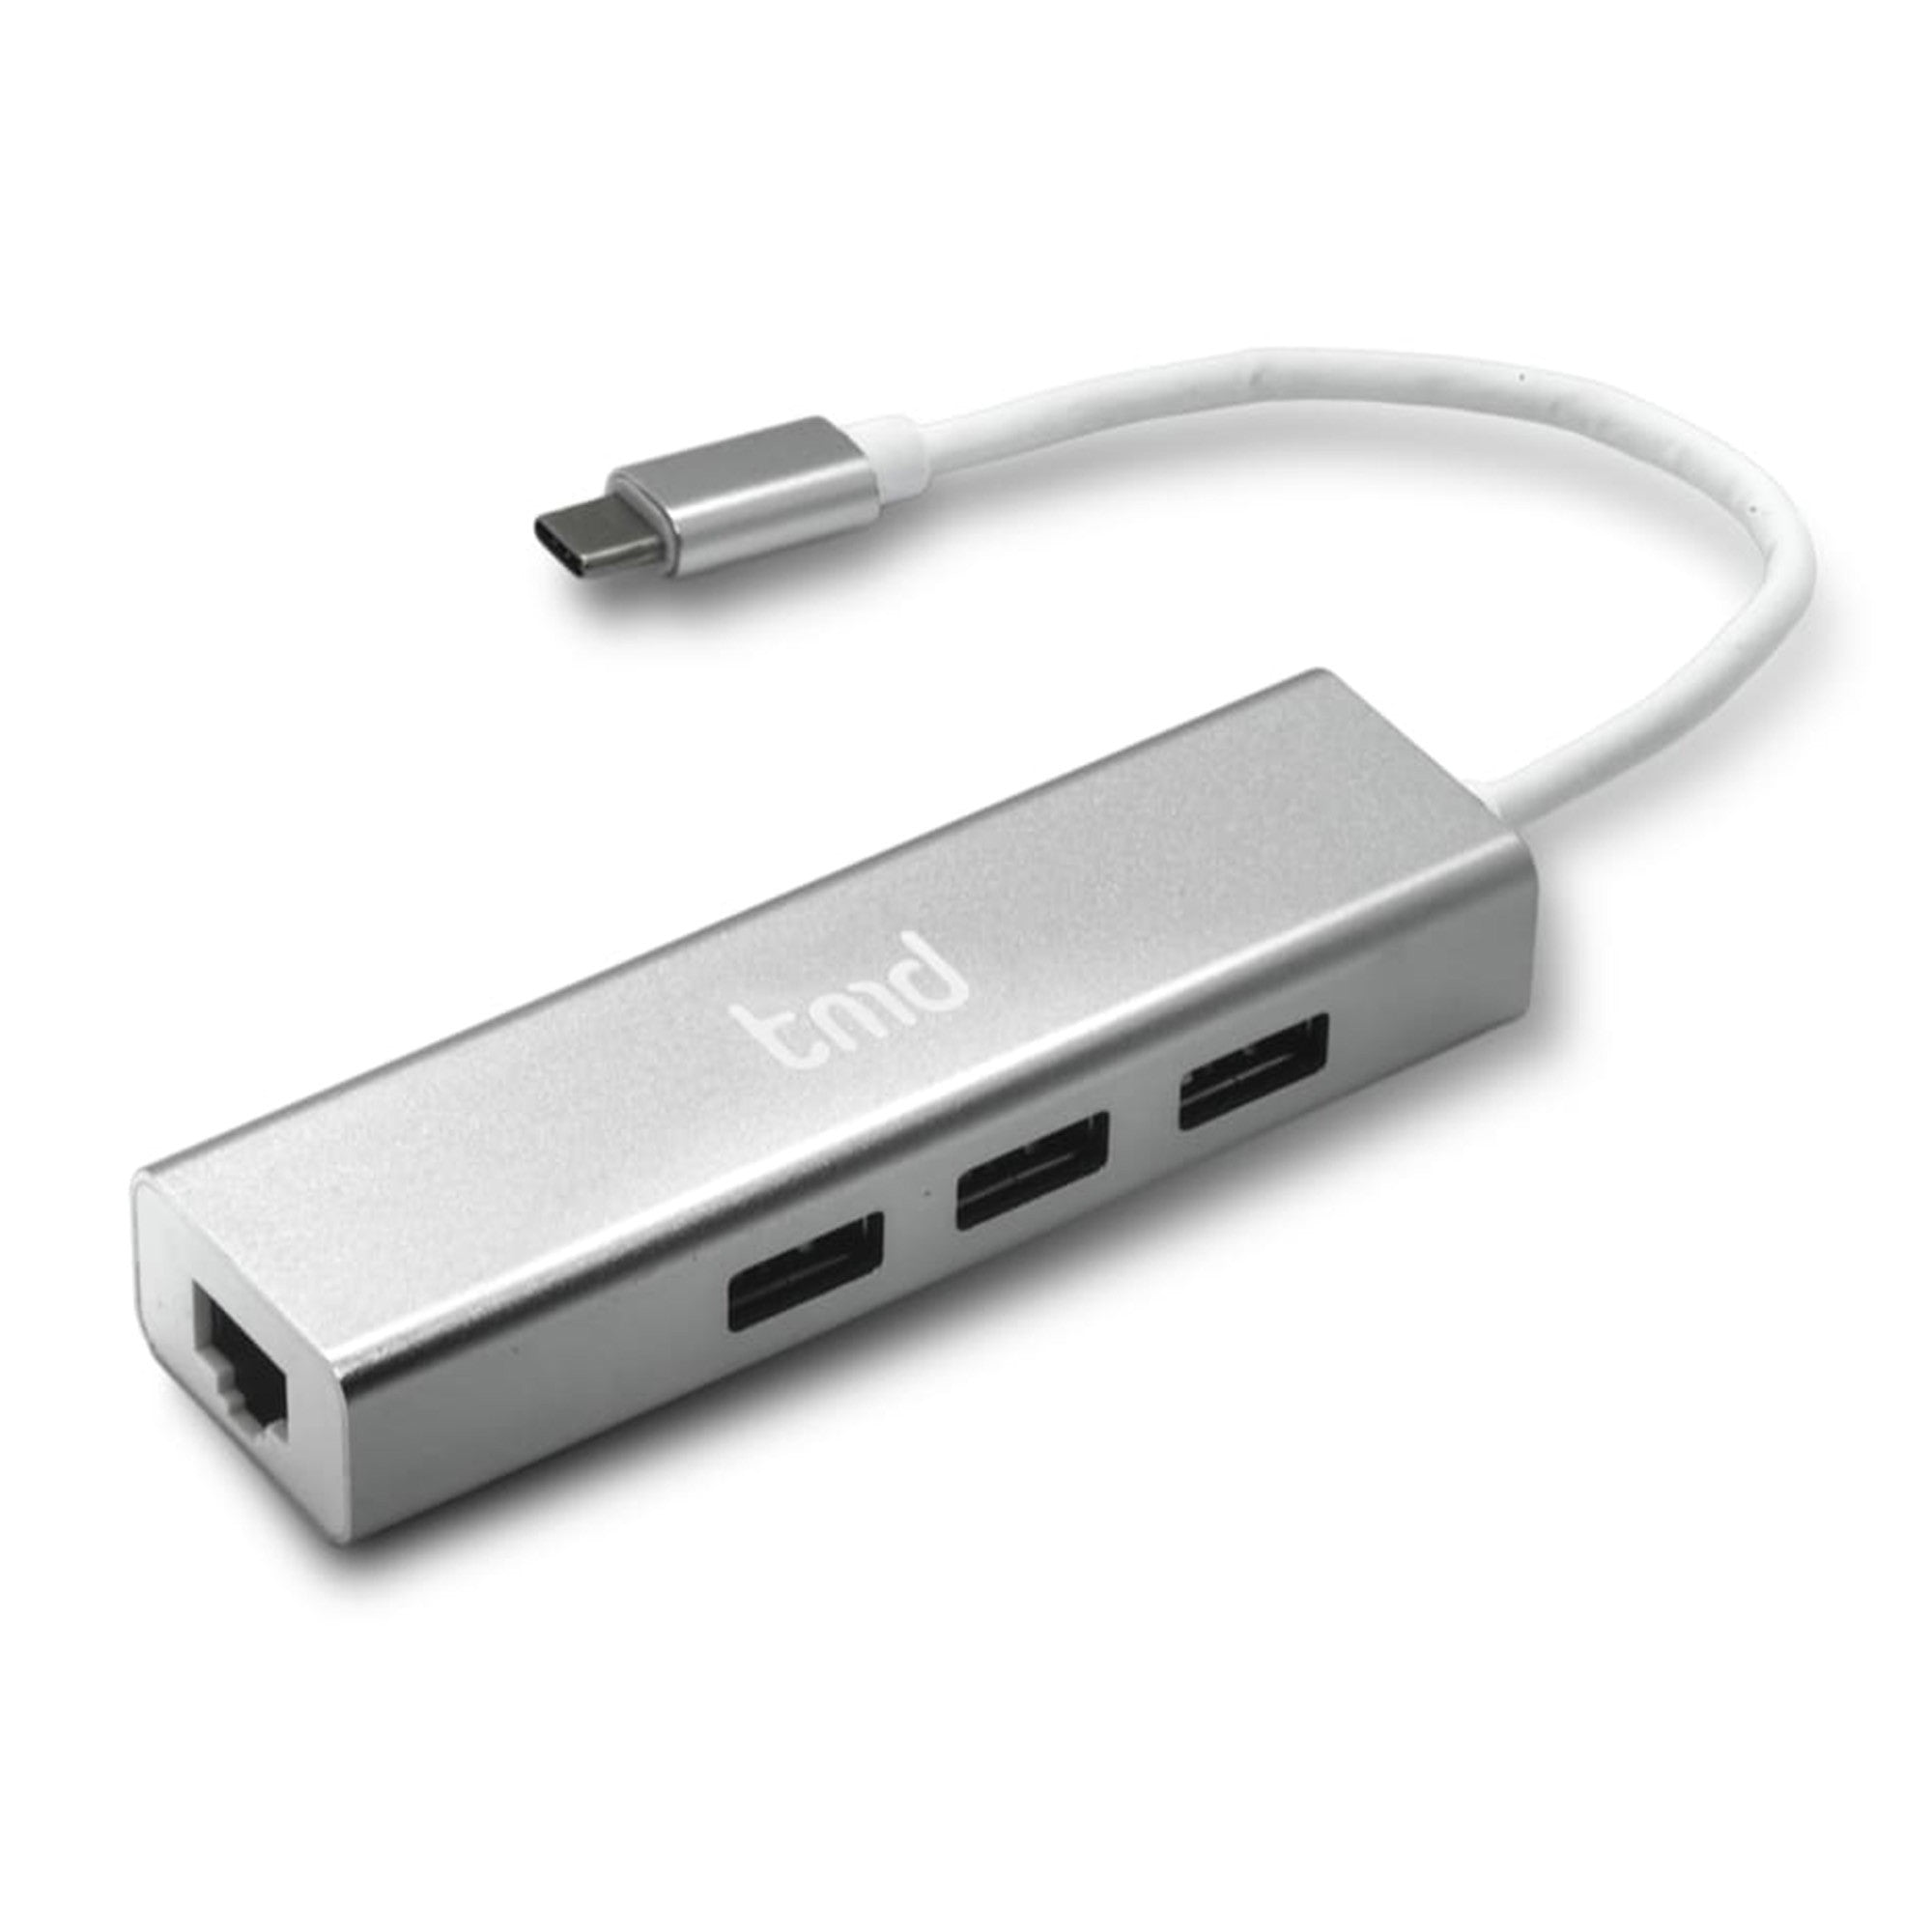 tmd USB-C to Ethernet/USB x 3 Adapter - Silver - 15-10490